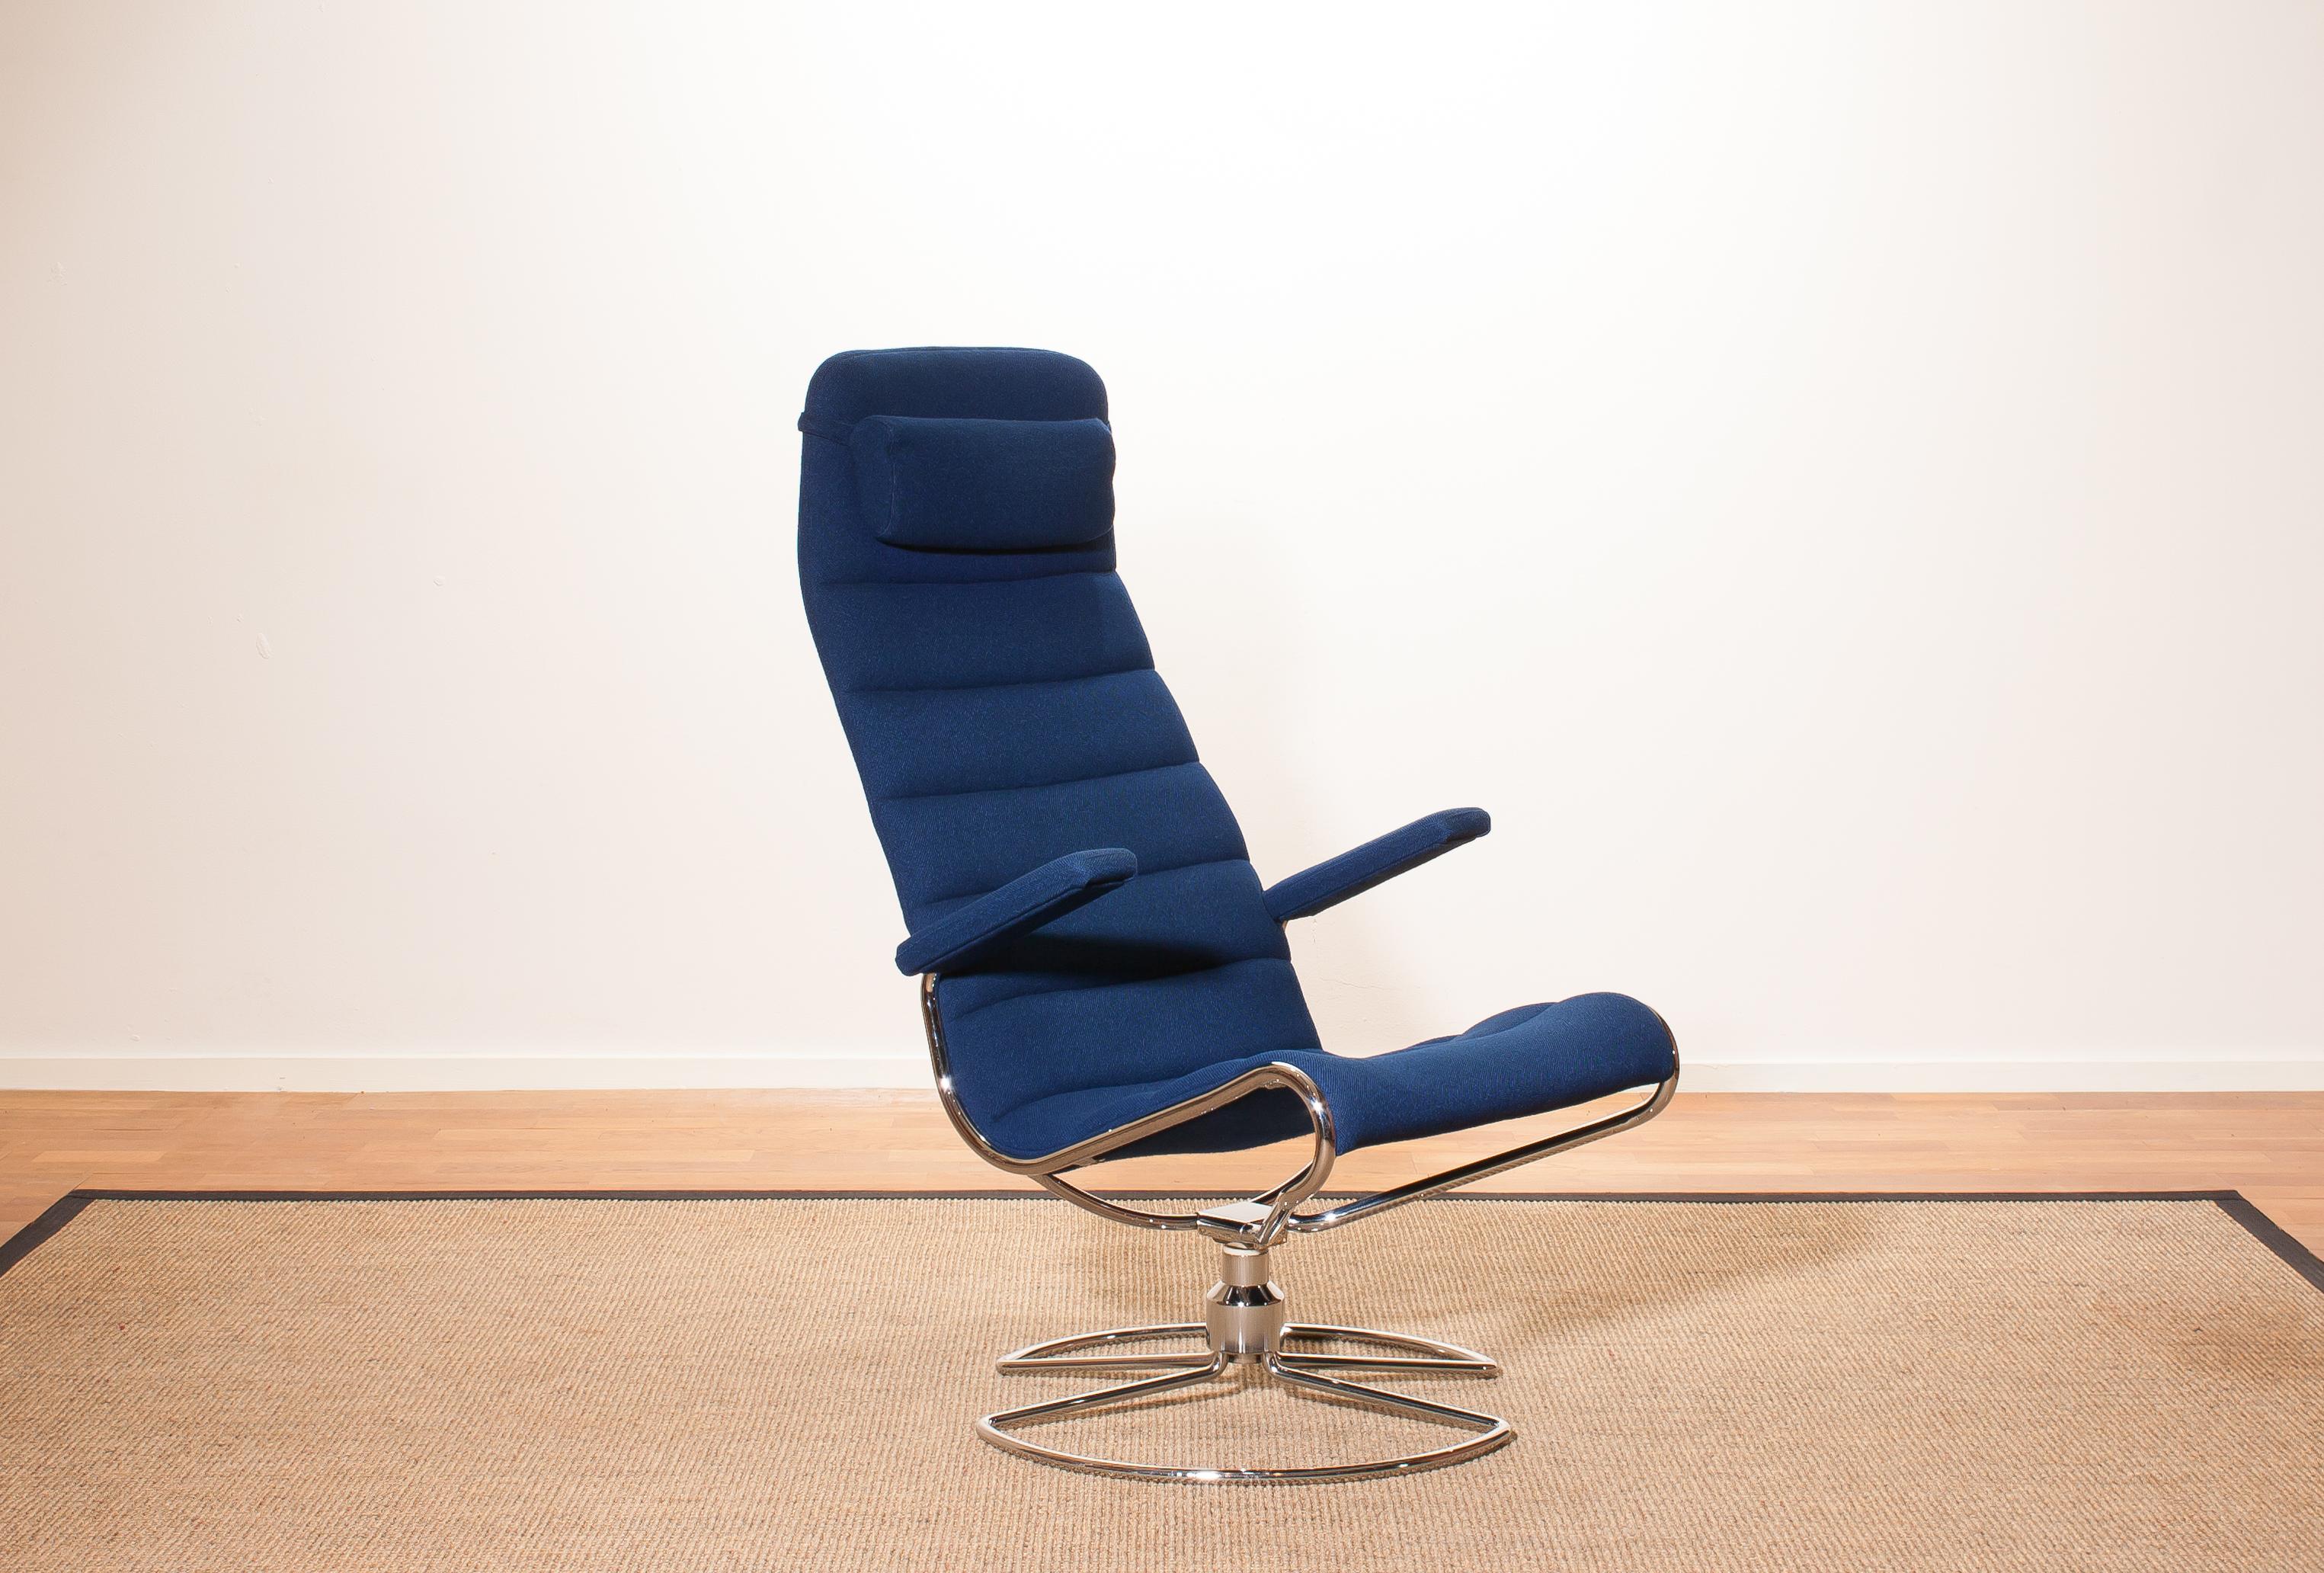 Beautiful 'Minister' chair designed by Bruno Mathsson.
It is upholstered with a Royal blue wooden fabric mounted on a swivel base of tubular chromed steel.
The chair is in very good condition.
Period 1980s.
Dimensions: H. 109 cm x W. 60 cm x D.